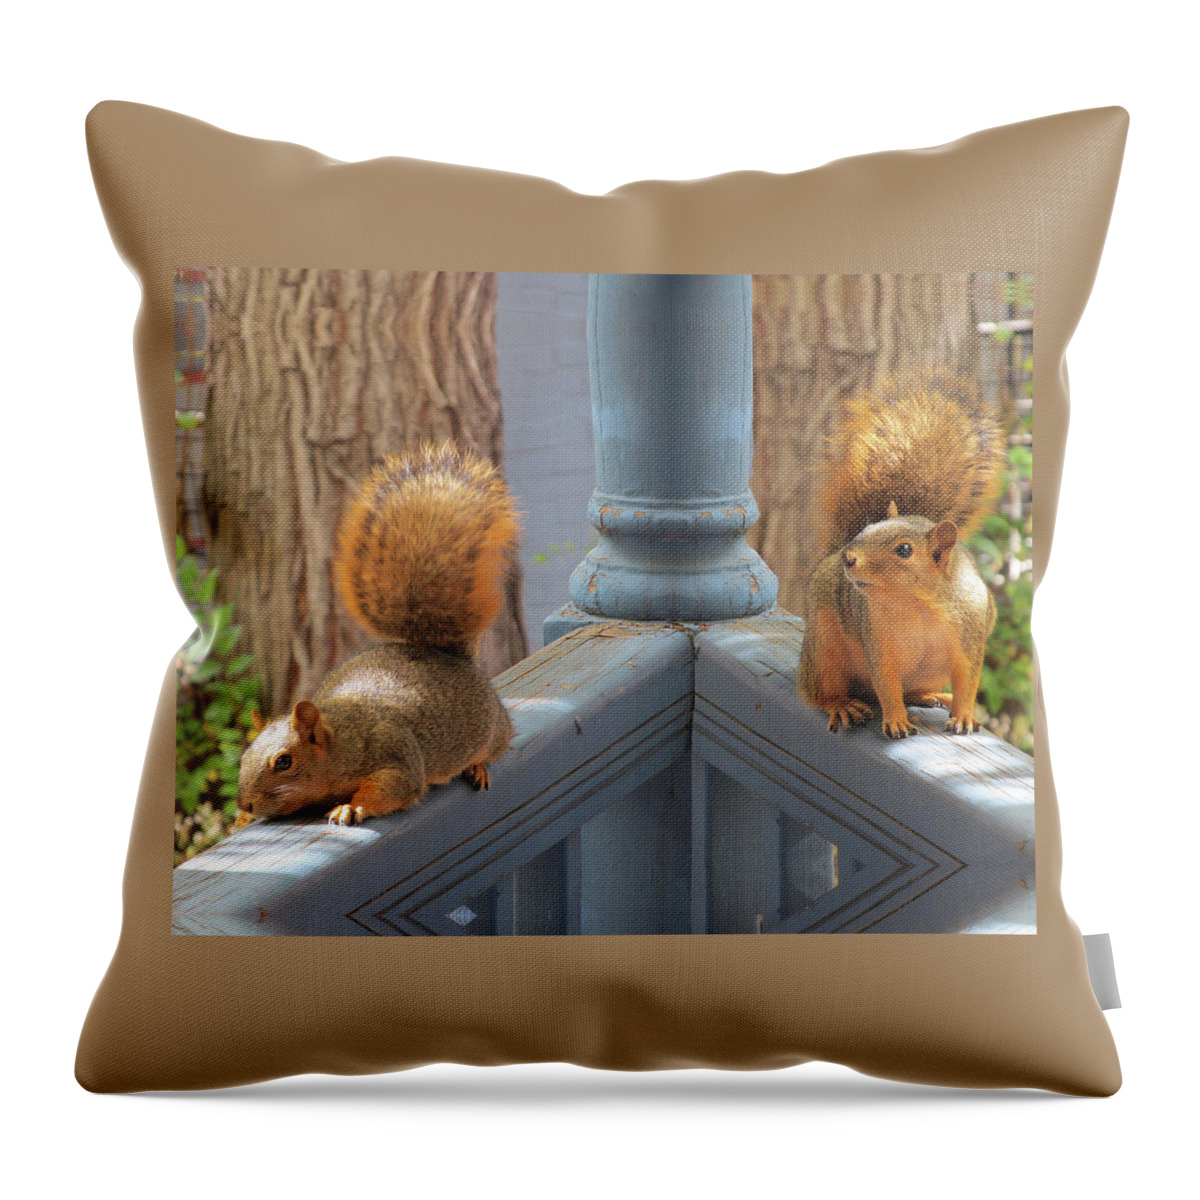 Squirrels Throw Pillow featuring the digital art Squirrels Balancing on a Railing by Julia L Wright